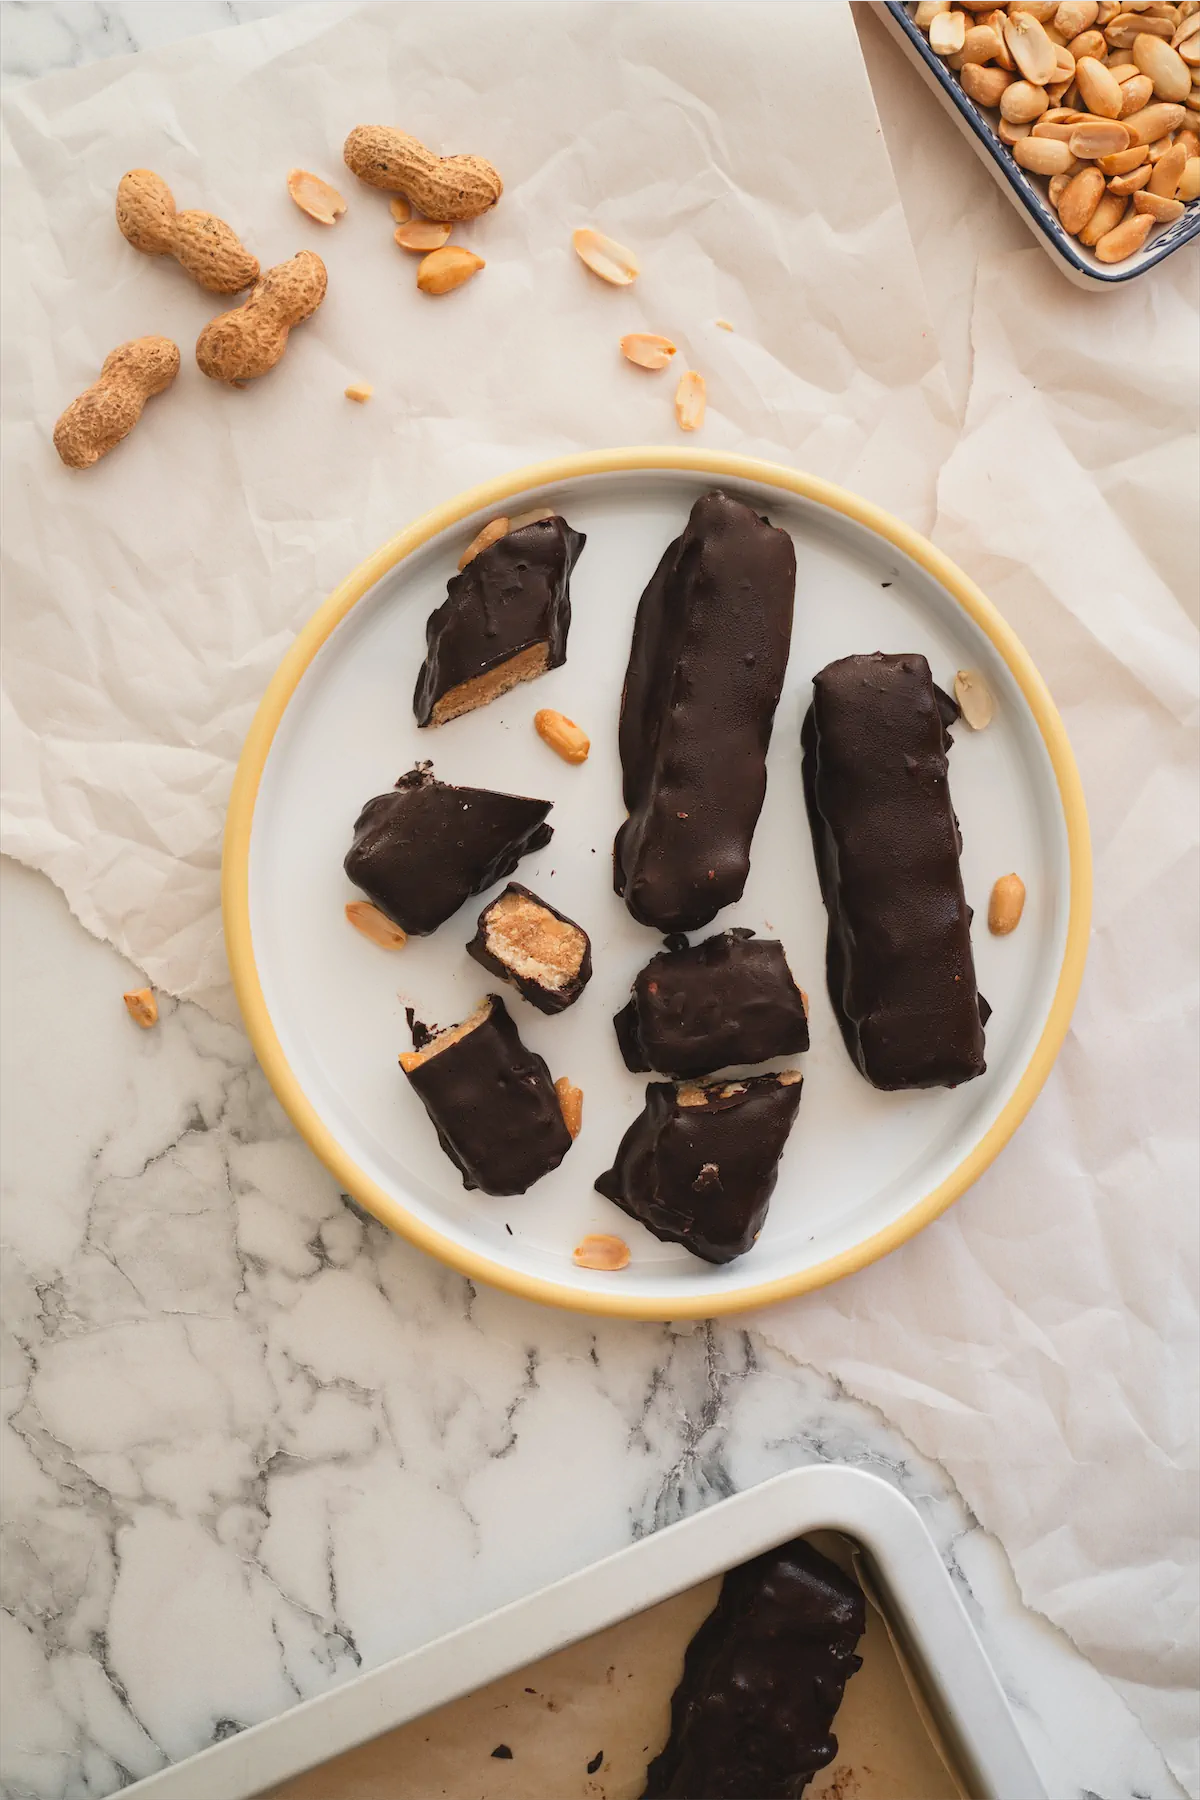 Keto copycat Snickers bar on a plate, and a few bars are cut to show the layers inside.